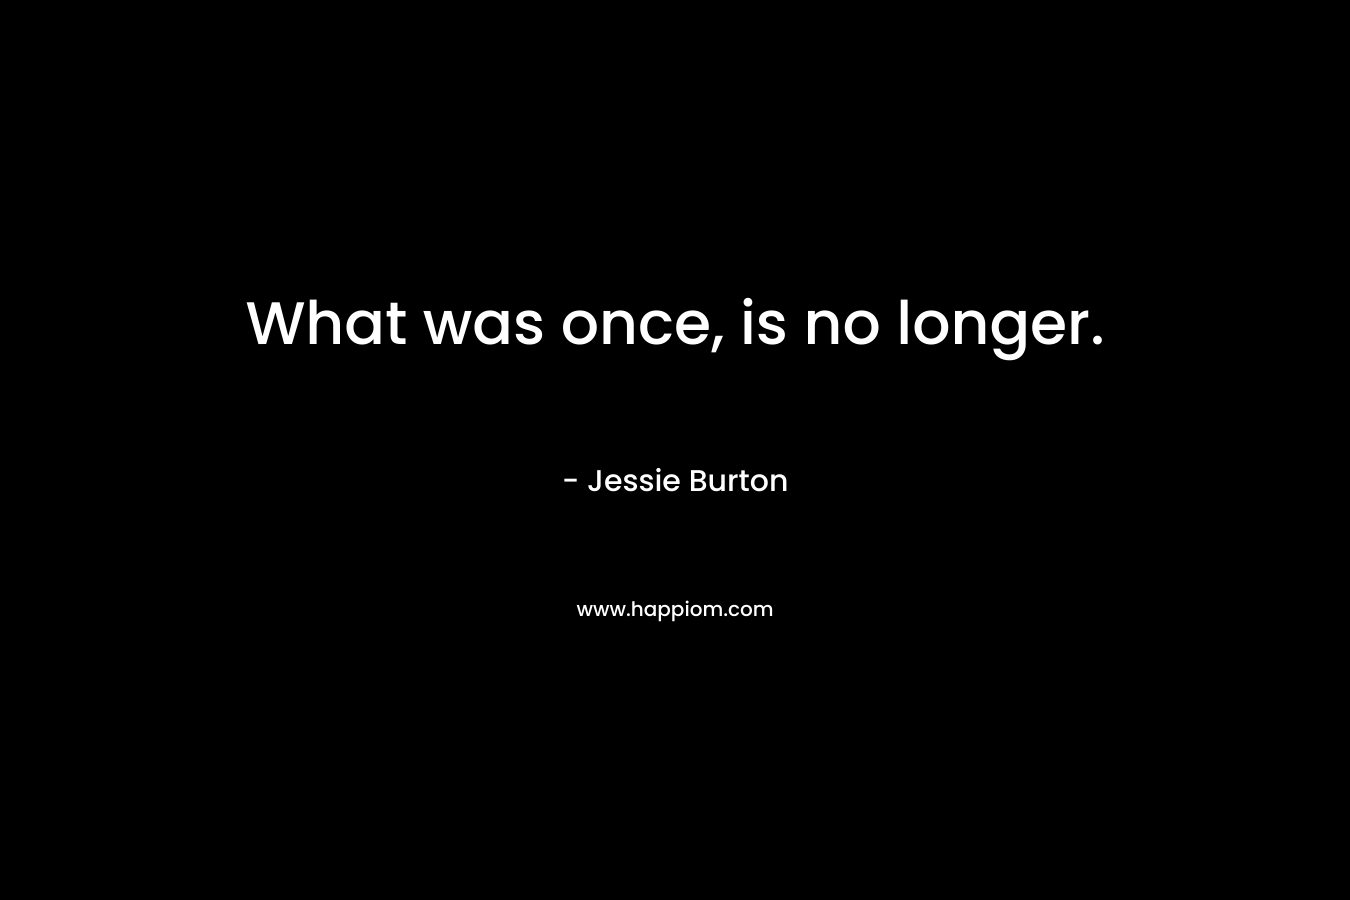 What was once, is no longer. – Jessie Burton